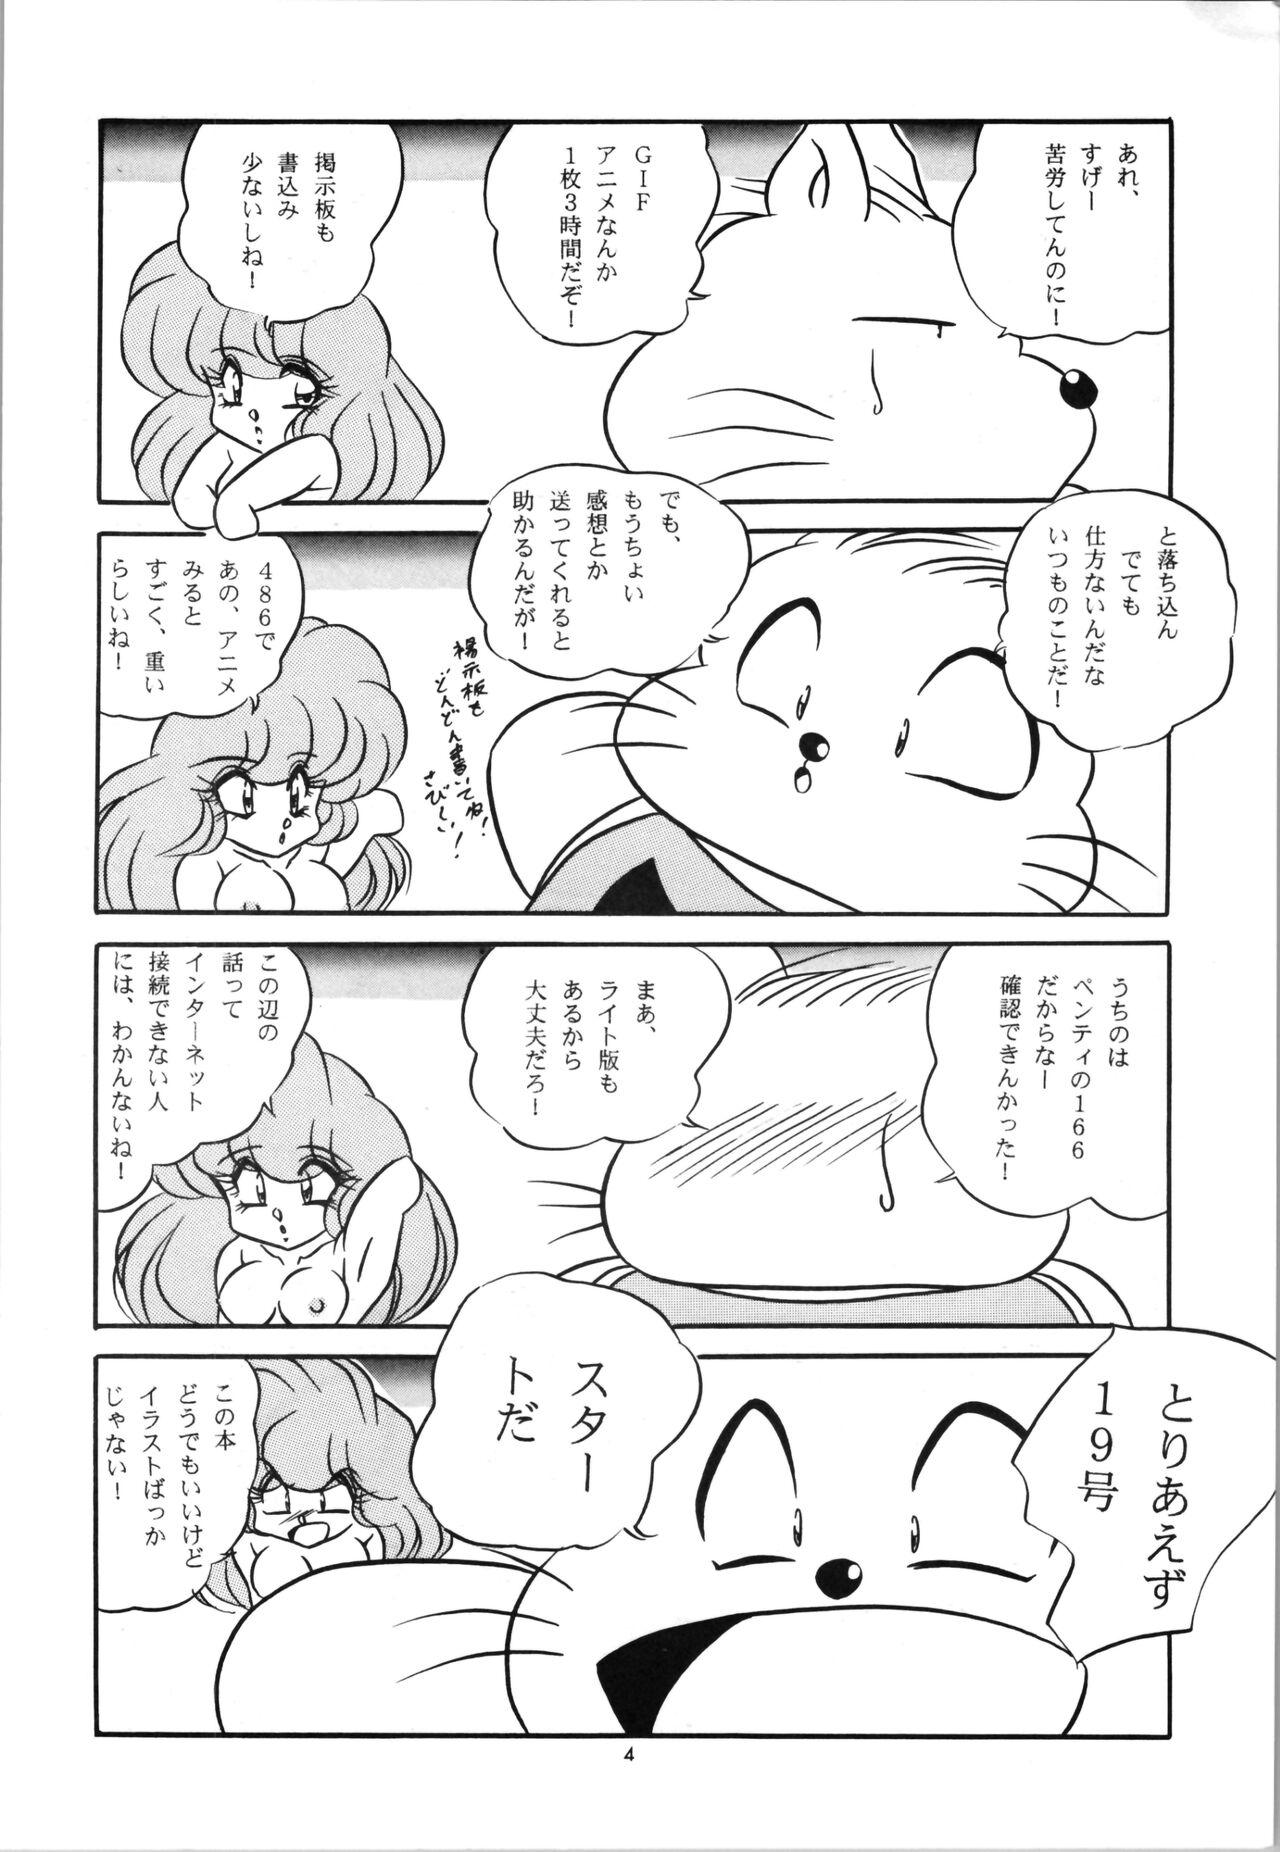 Moms C-COMPANY SPECIAL STAGE 19 - Ranma 12 Boys - Page 6